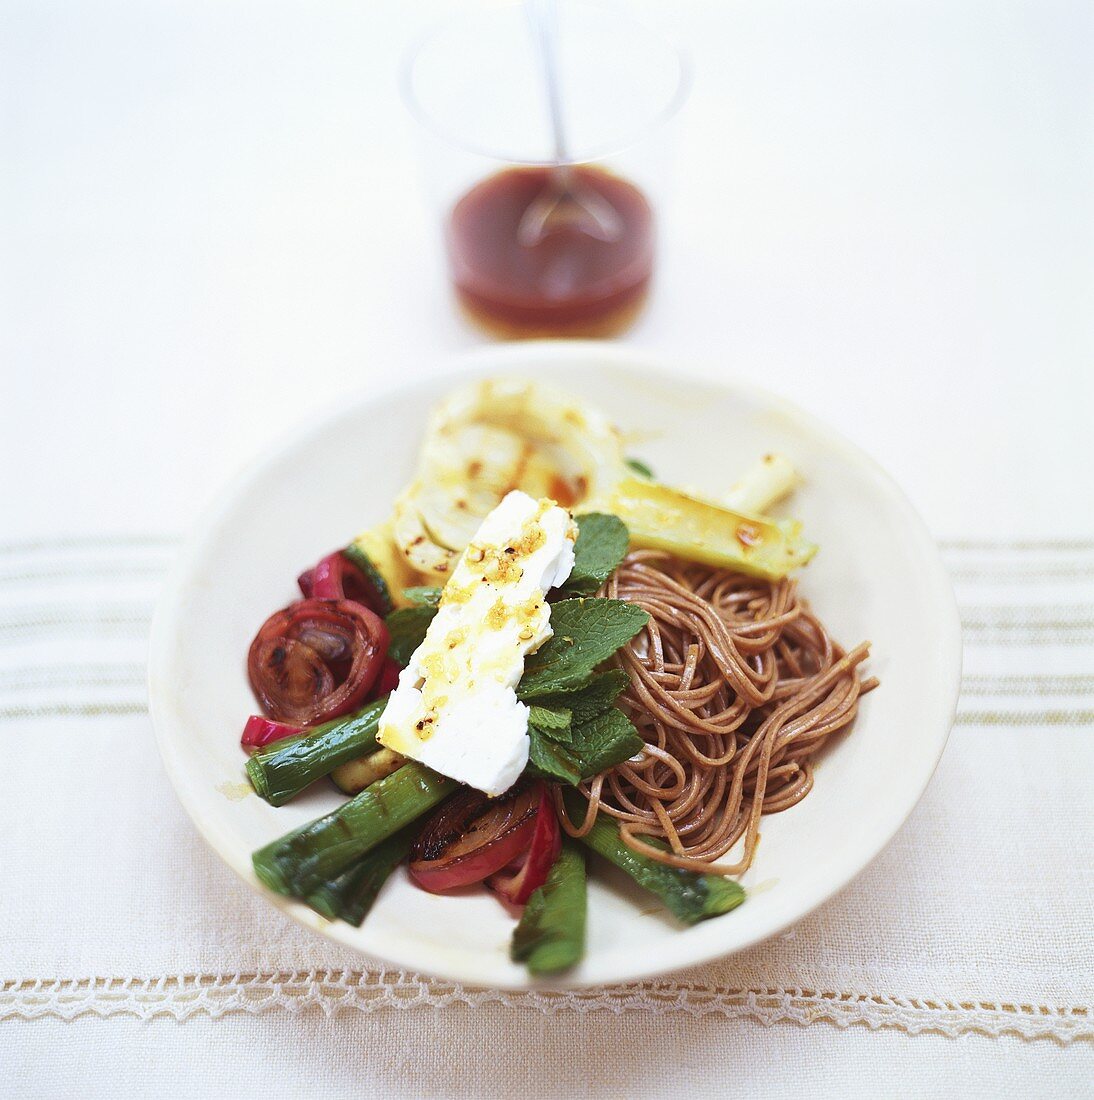 Wholemeal spaghetti with grilled vegetables & sheep's cheese